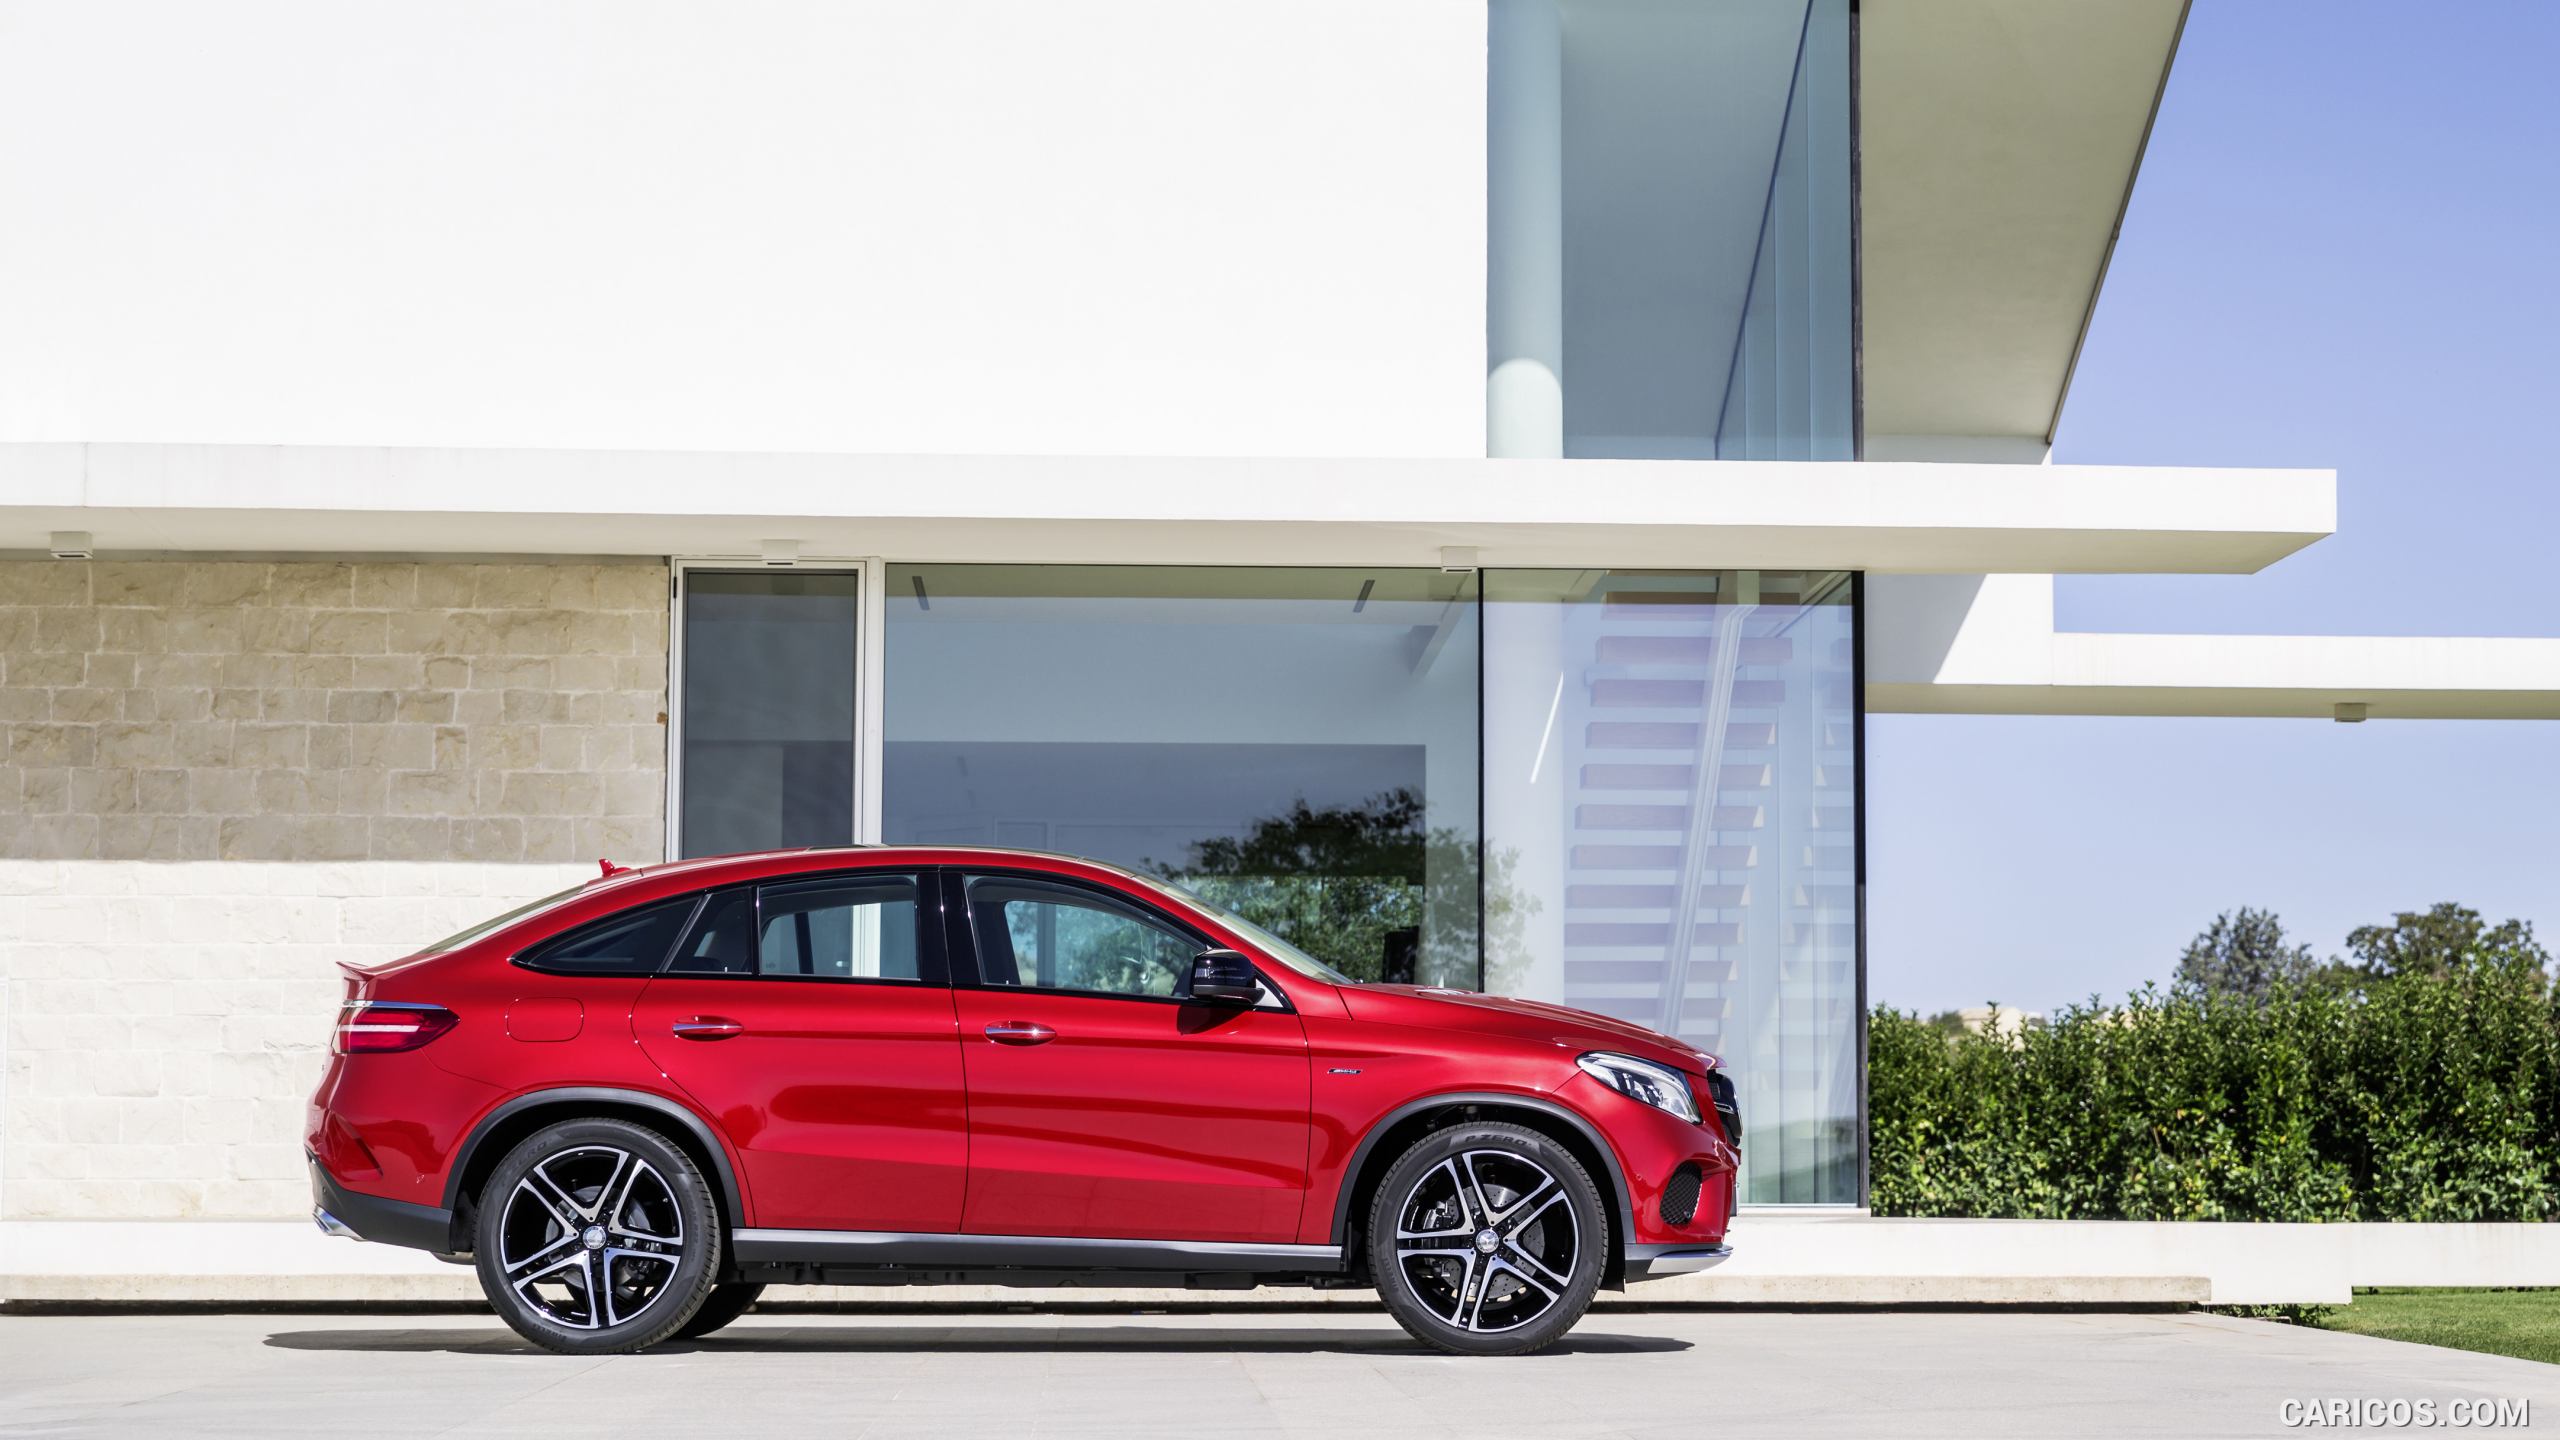 2016 Mercedes-Benz GLE 450 AMG Coupe 4MATIC (Designo Hyacinth Red Metallic) - Side, #7 of 115